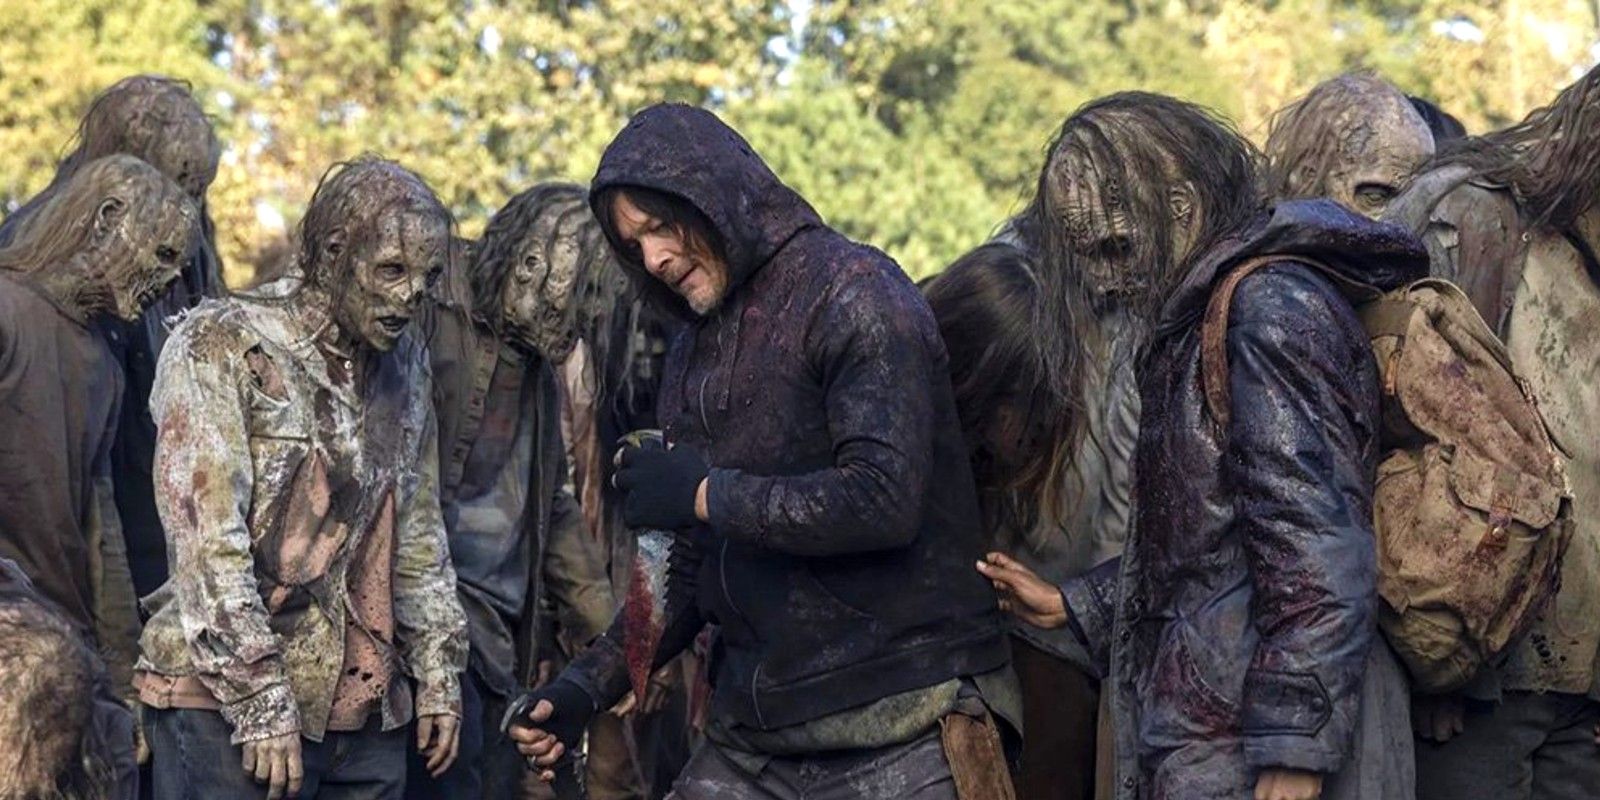 New Walking Dead Season 10 Finale Images Show All-Out War With The Whisperers